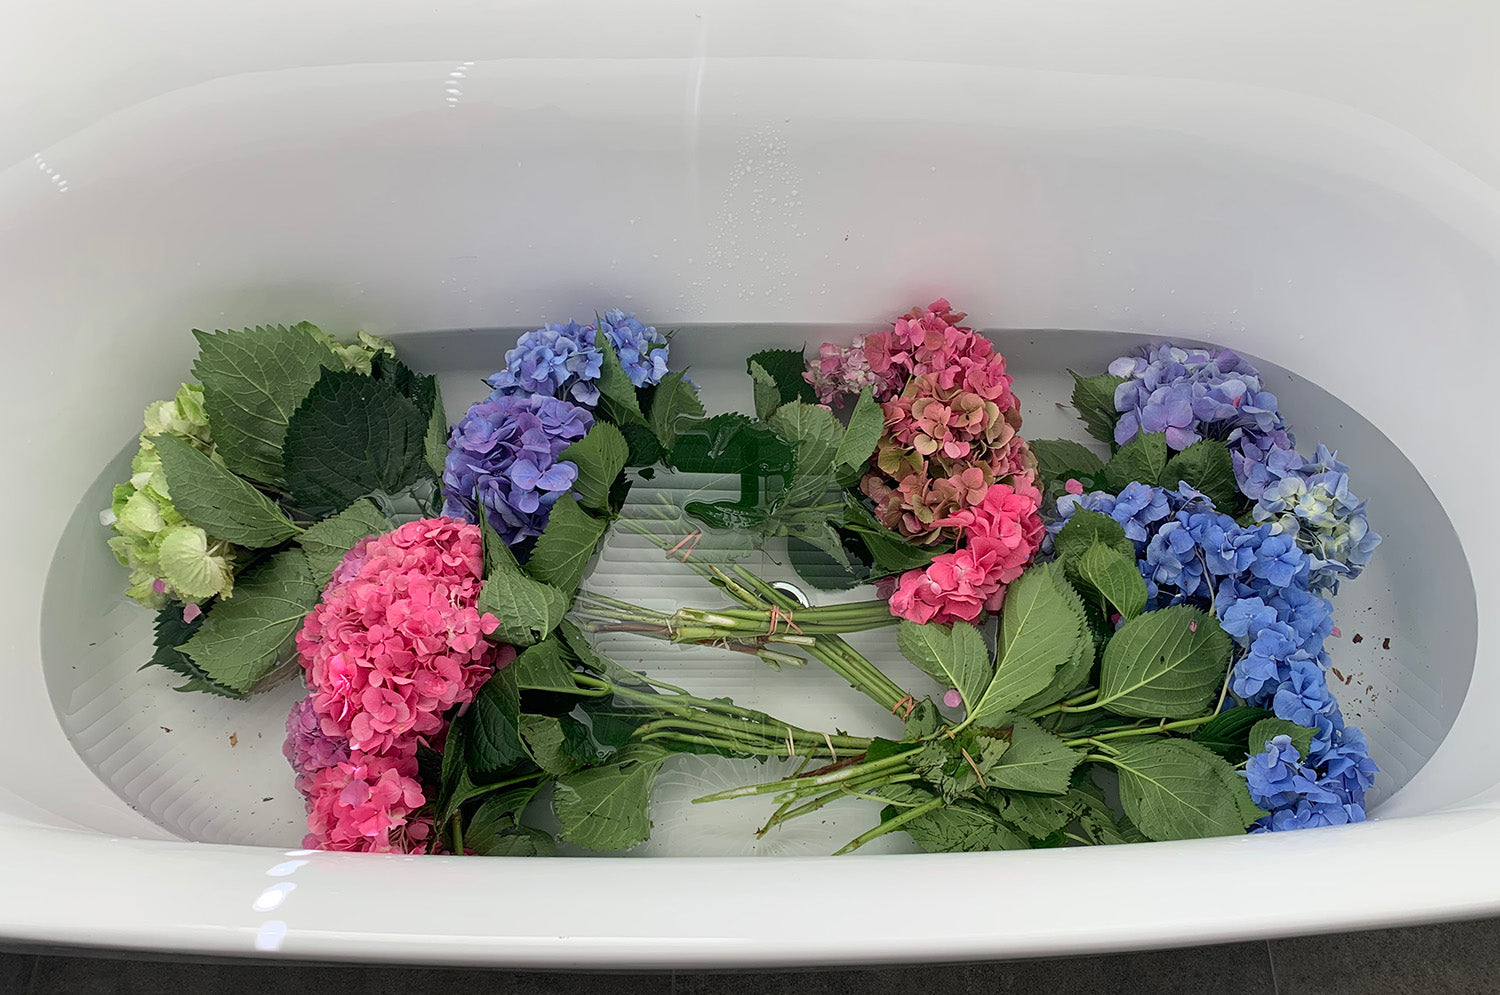 Hydrangea flowers being soaked in a bath at home